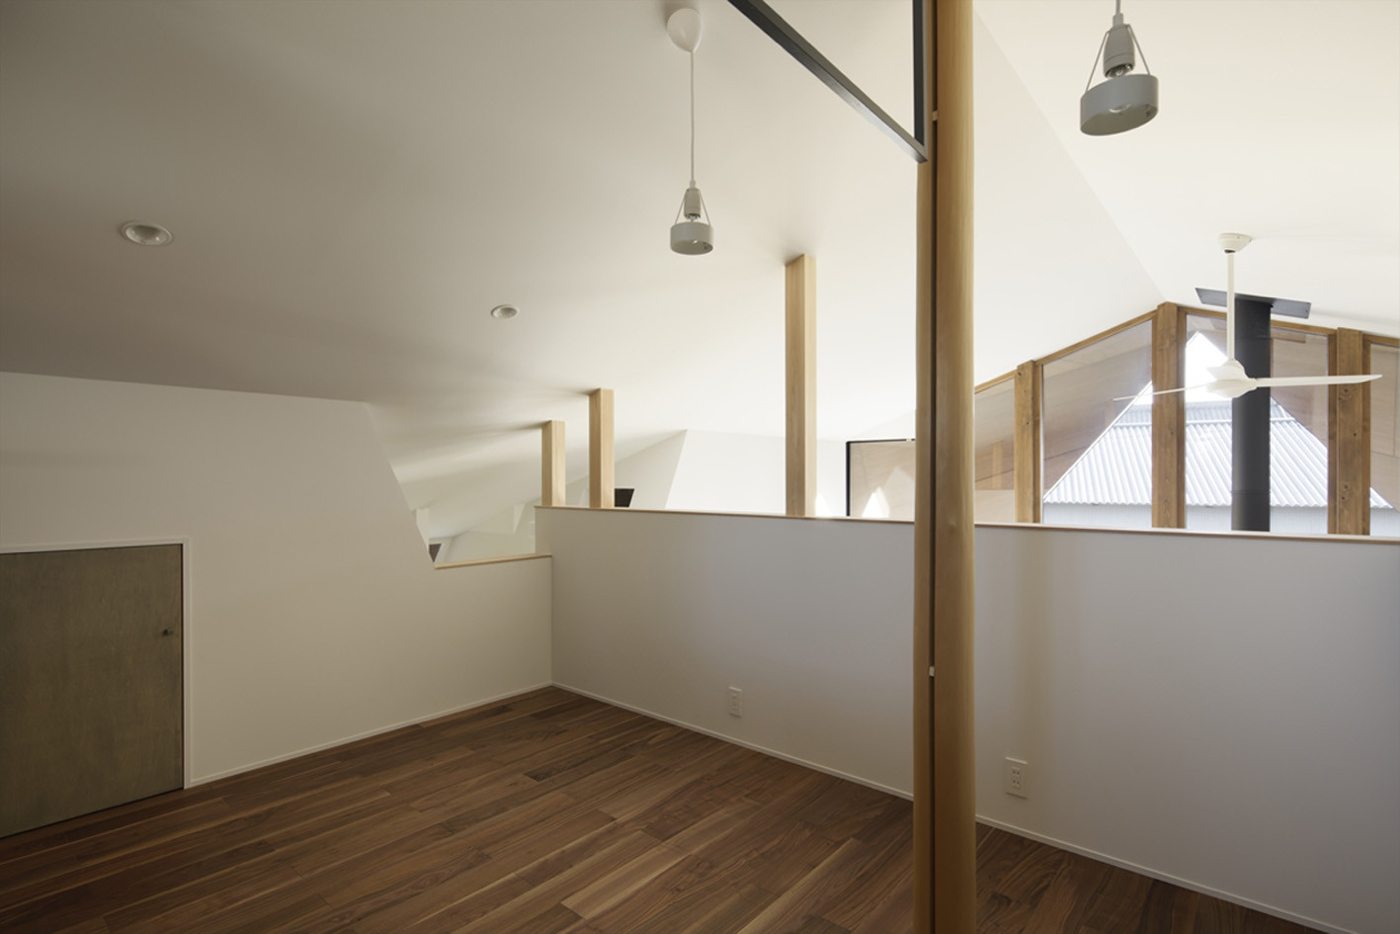 Space under a roof slopes with sharing floors and white walls